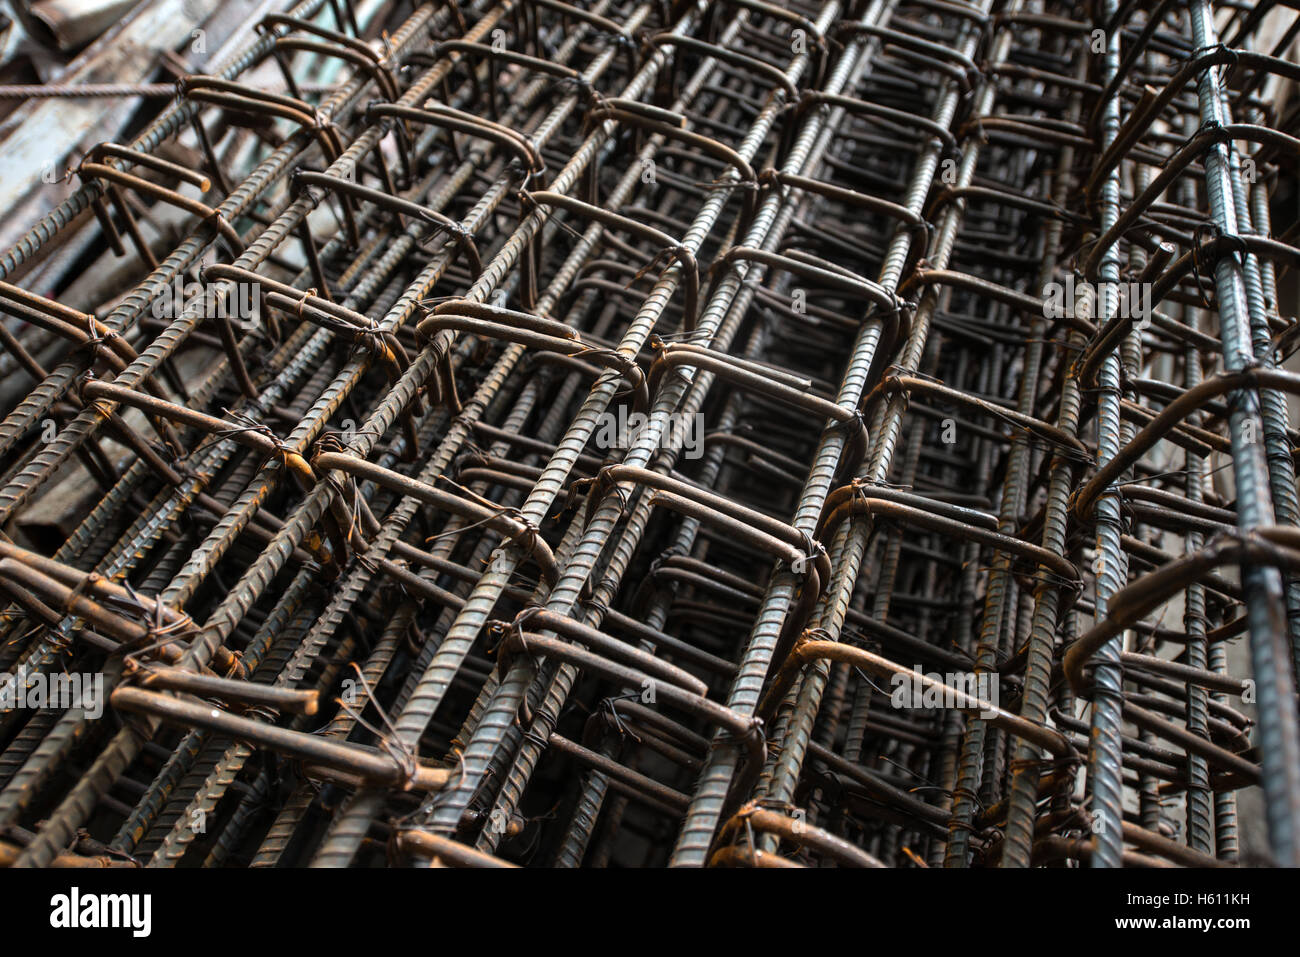 steel bars for reinforcing concrete at construction site Stock Photo